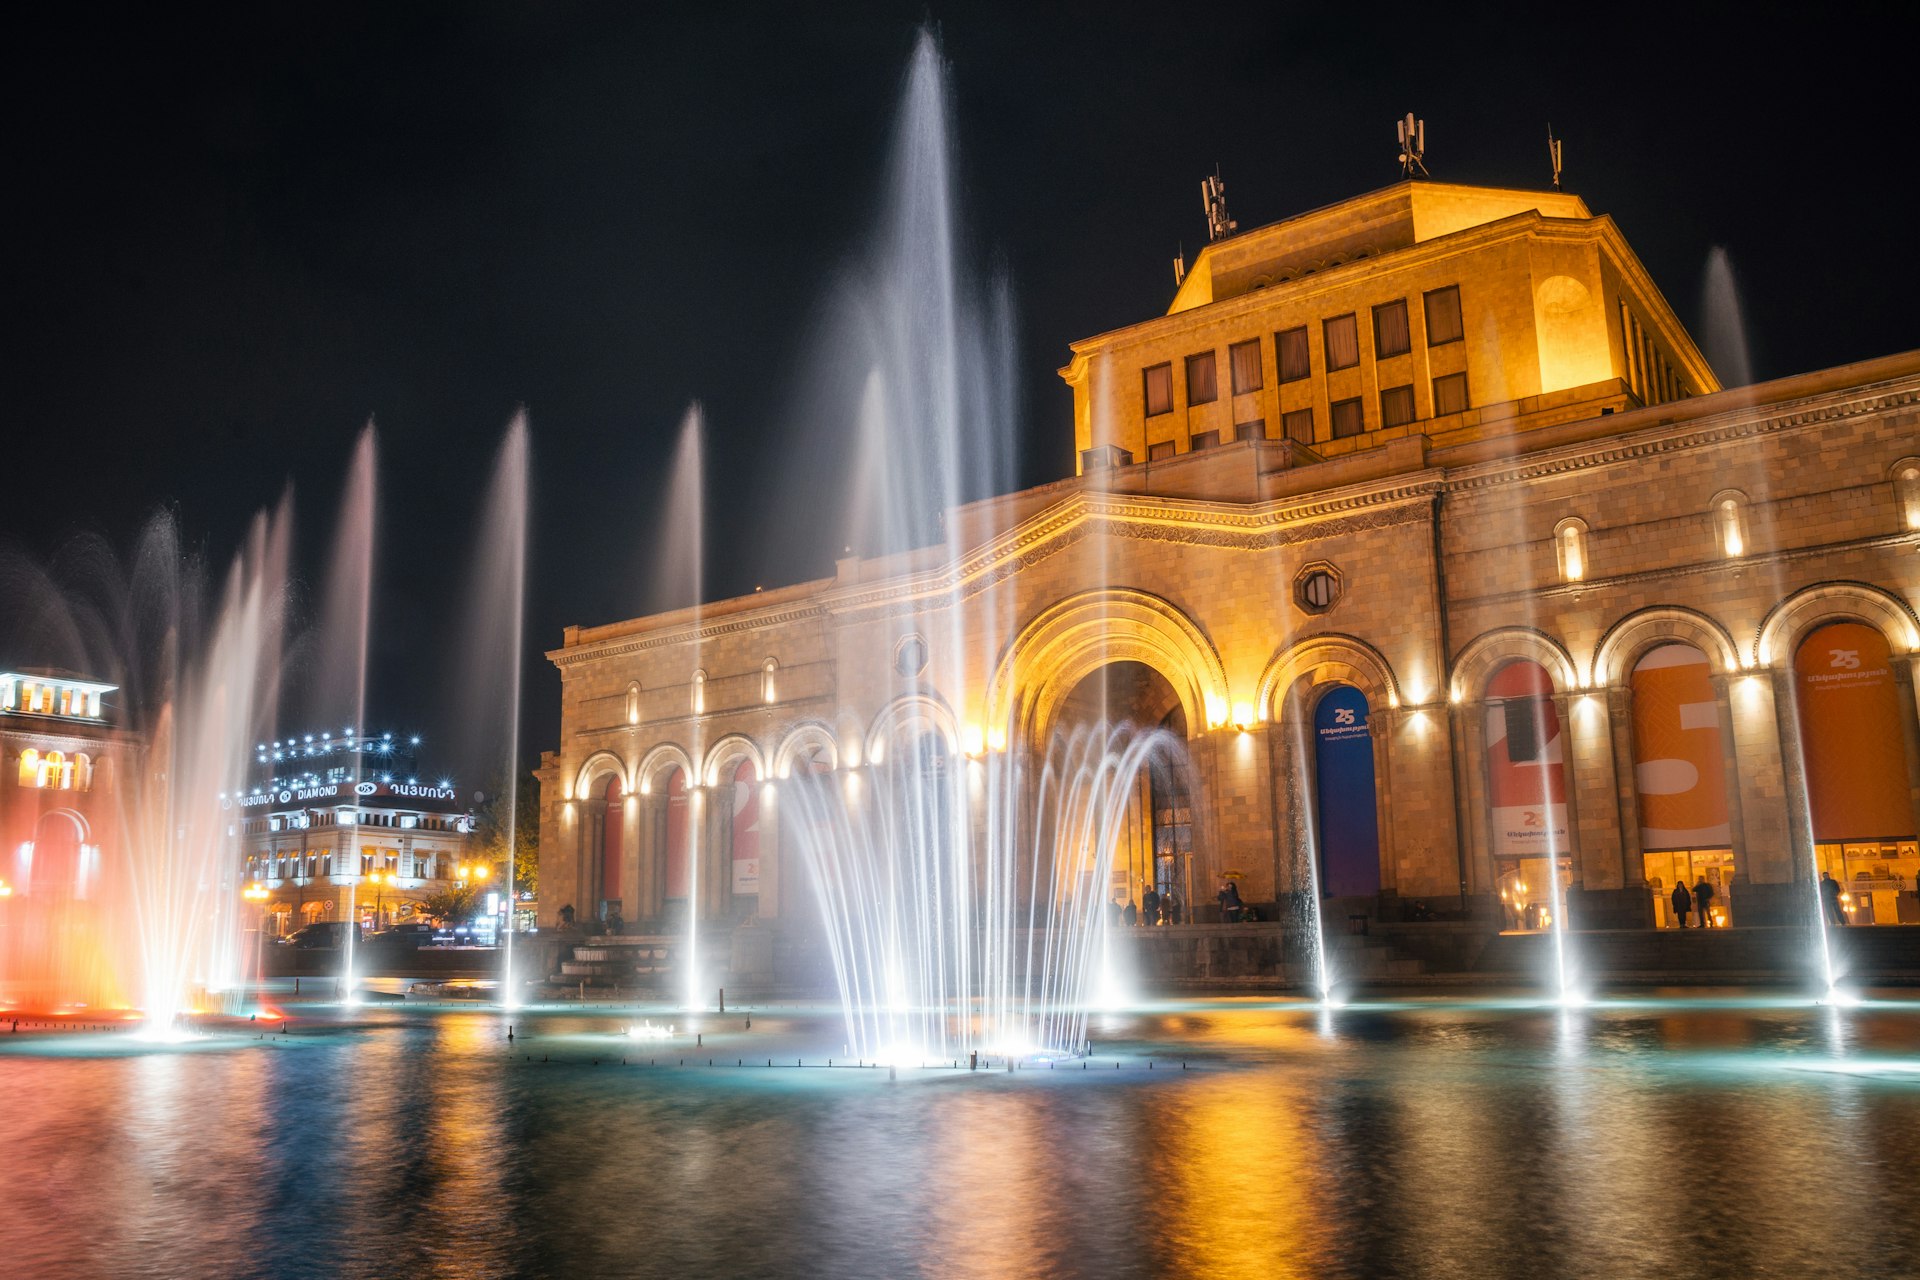 Fountains dance to music in Republic Square